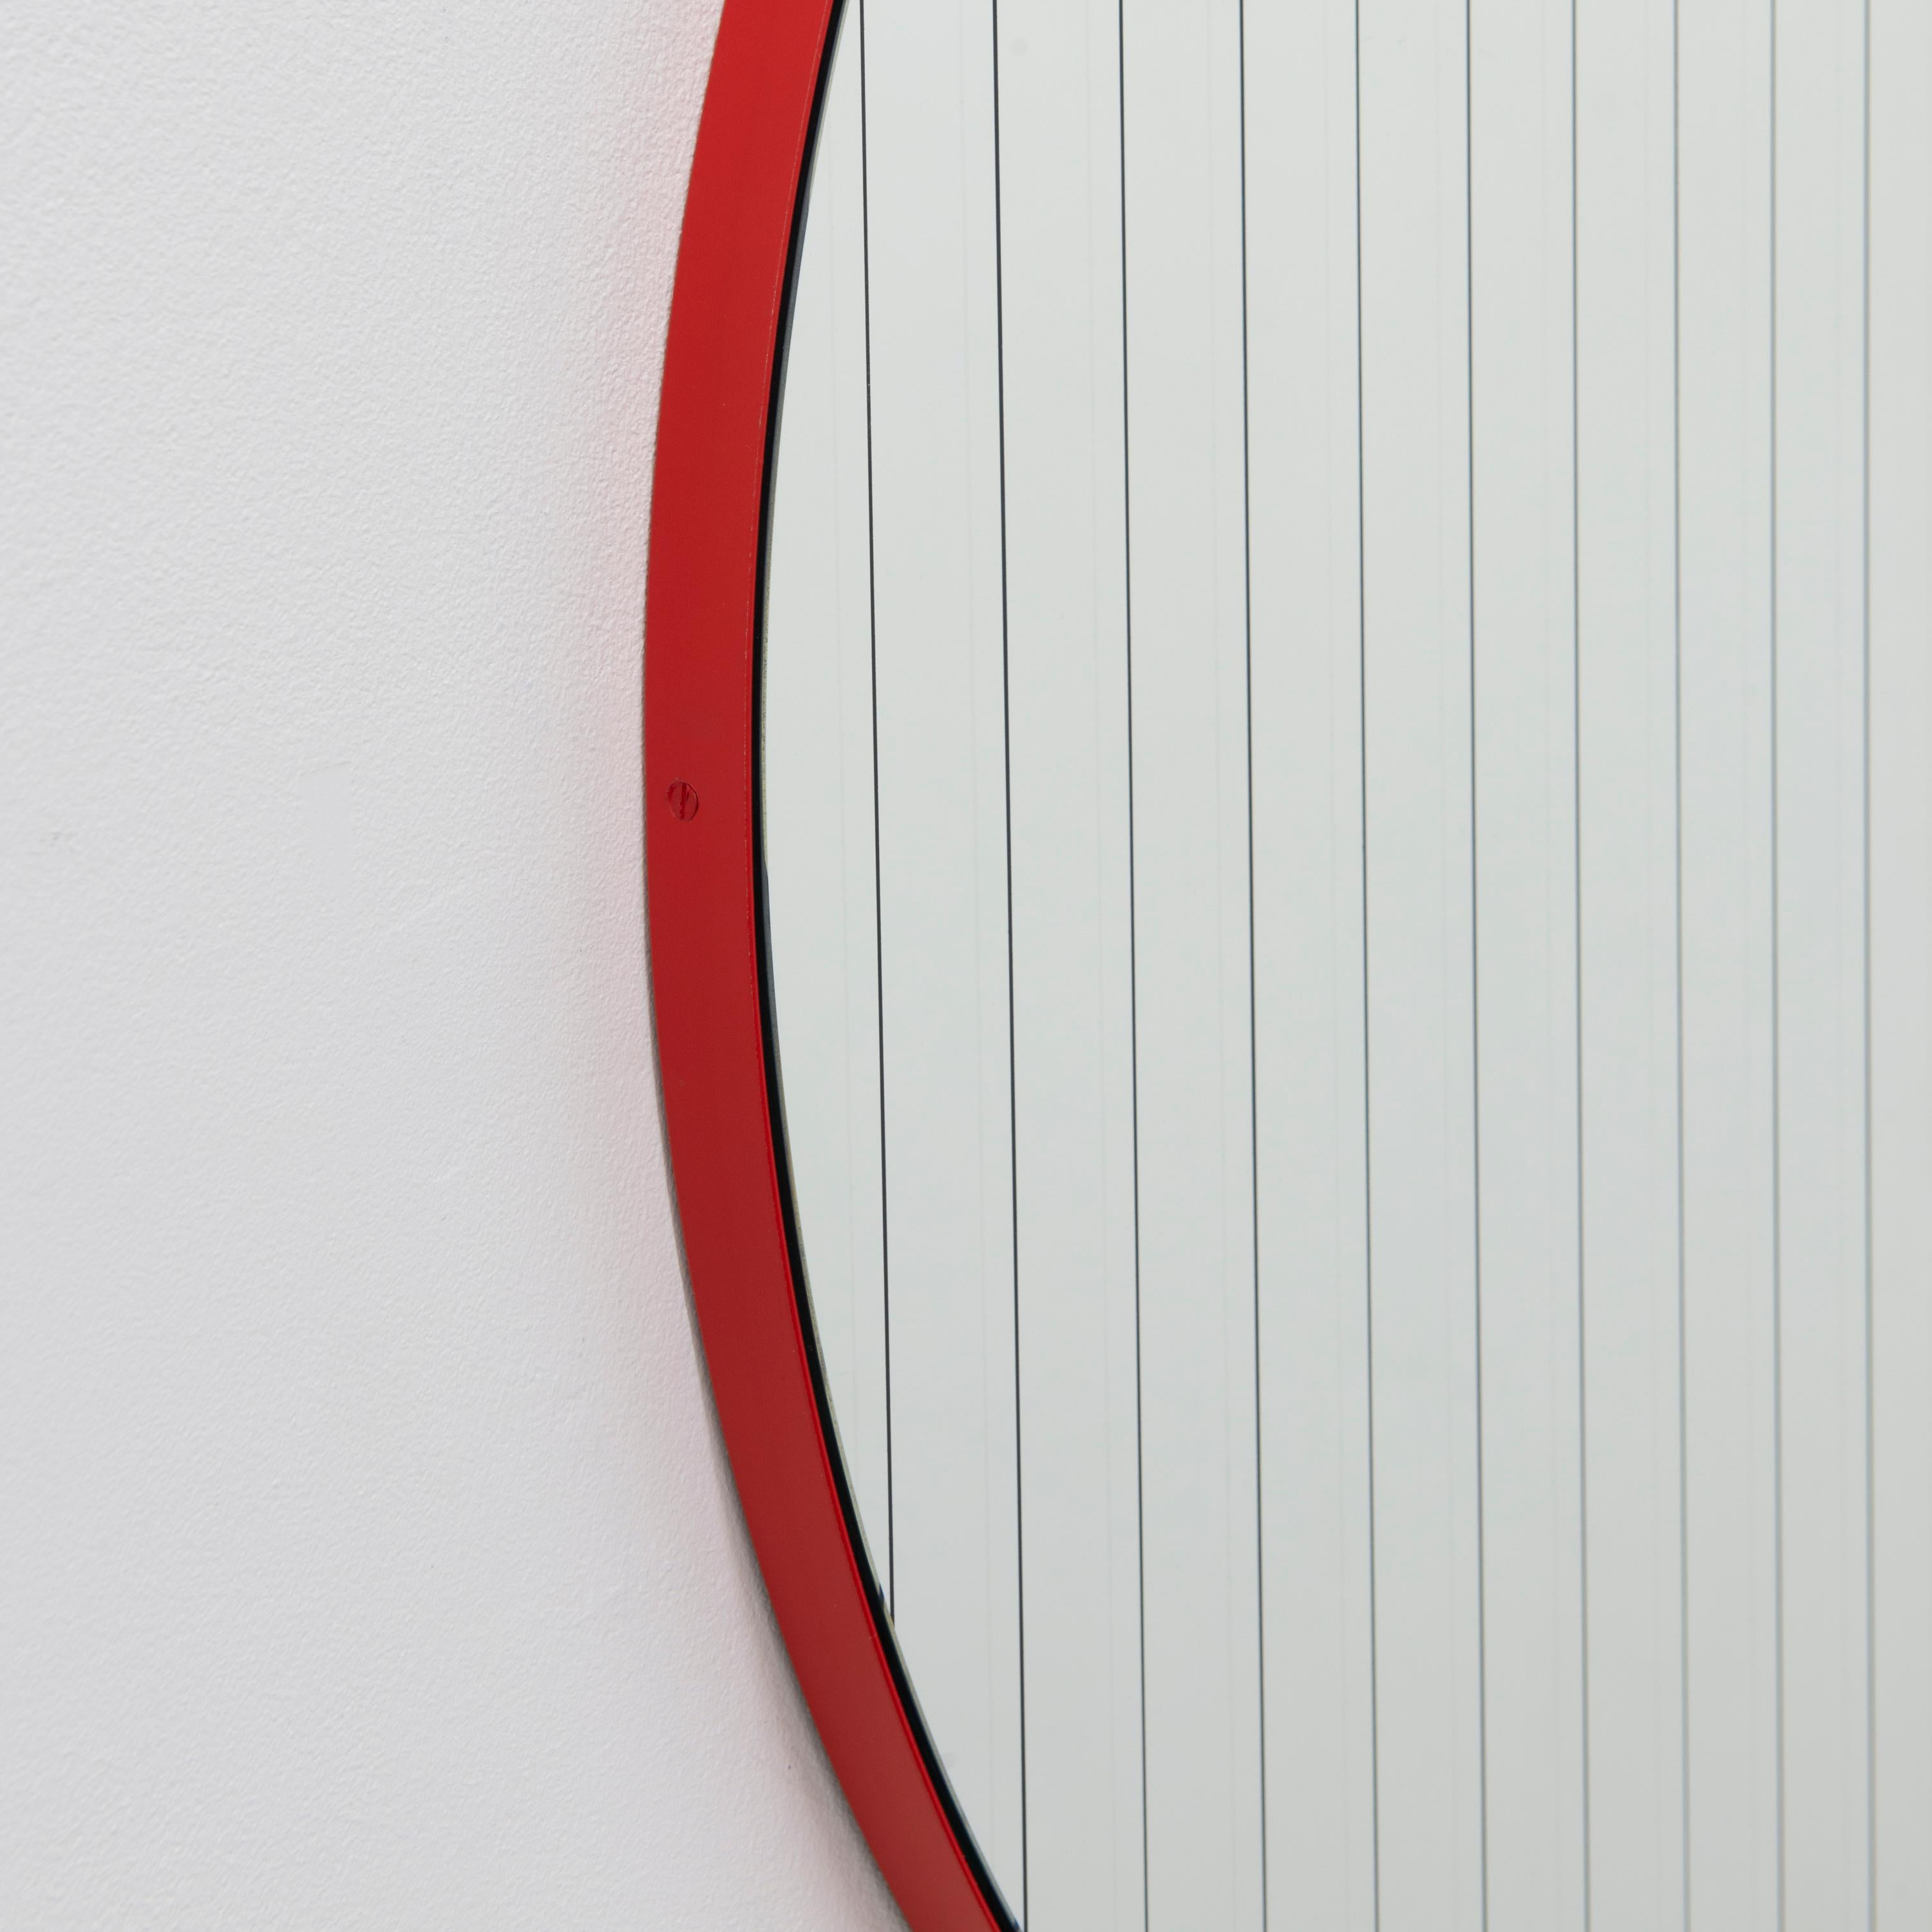 British Orbis Linus Round Contemporary Sandblasted Mirror with Strips and Red Frame, XL